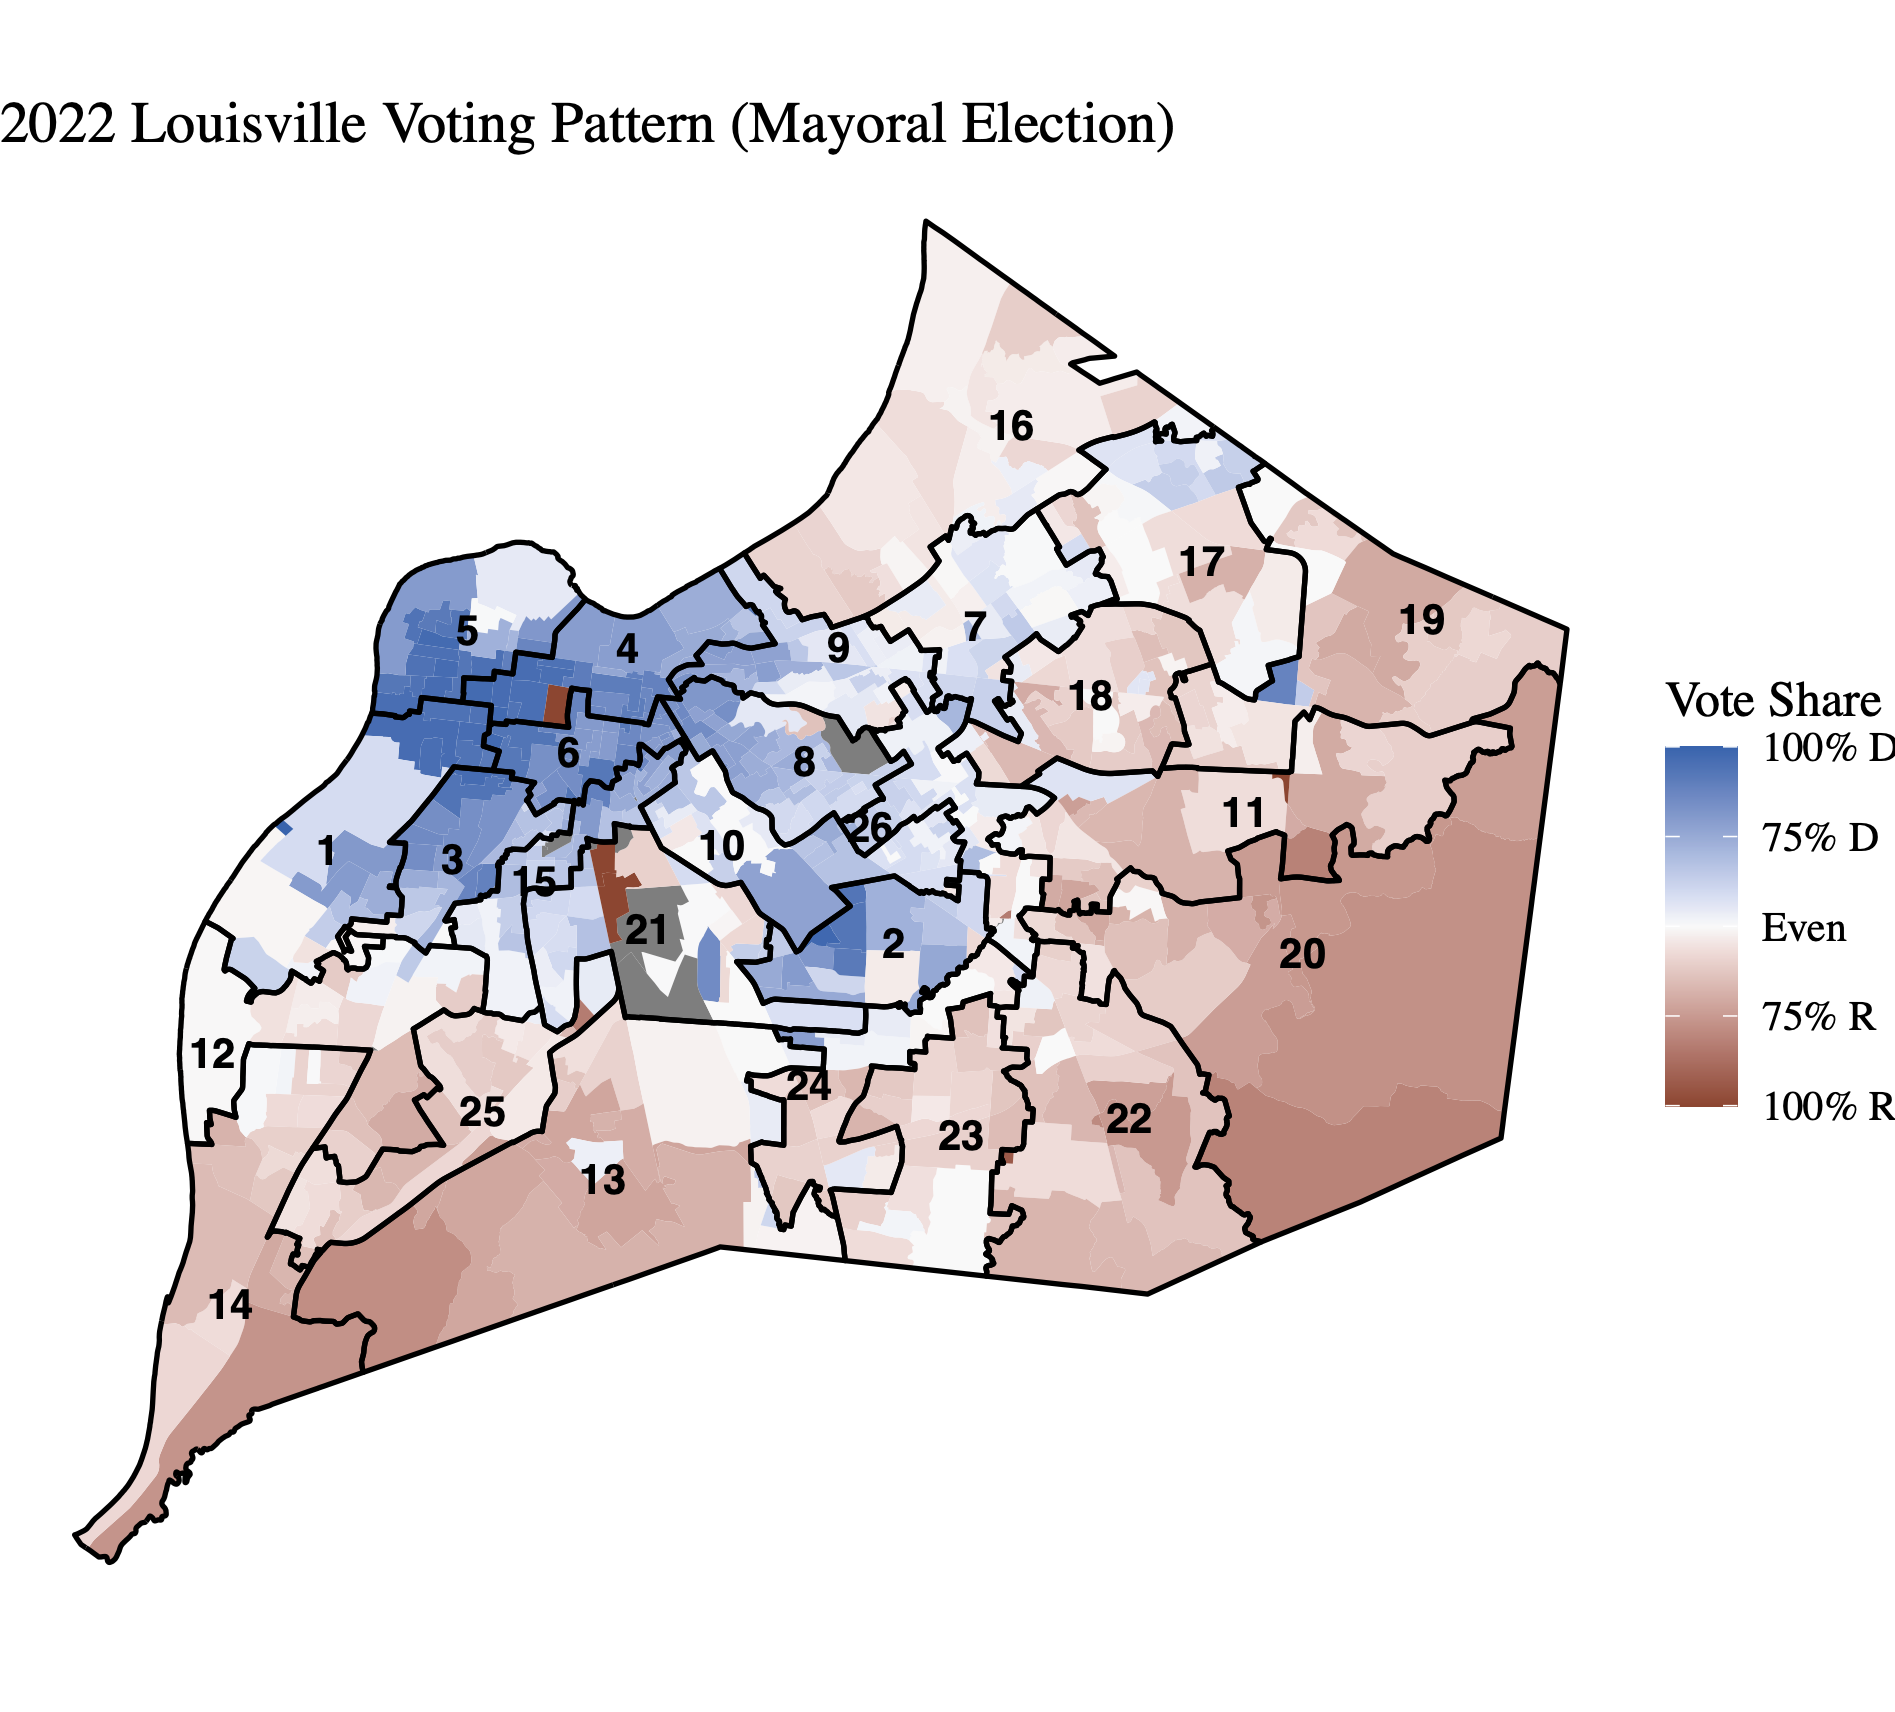 Figure 2: This map shows precinct-level voting shares in Louisville (2022 Mayoral Election). A darker shade indicates a larger number of voters supporting either of the parties within the precinct. The black lines represent the current district boundaries, each marked with its corresponding district number.